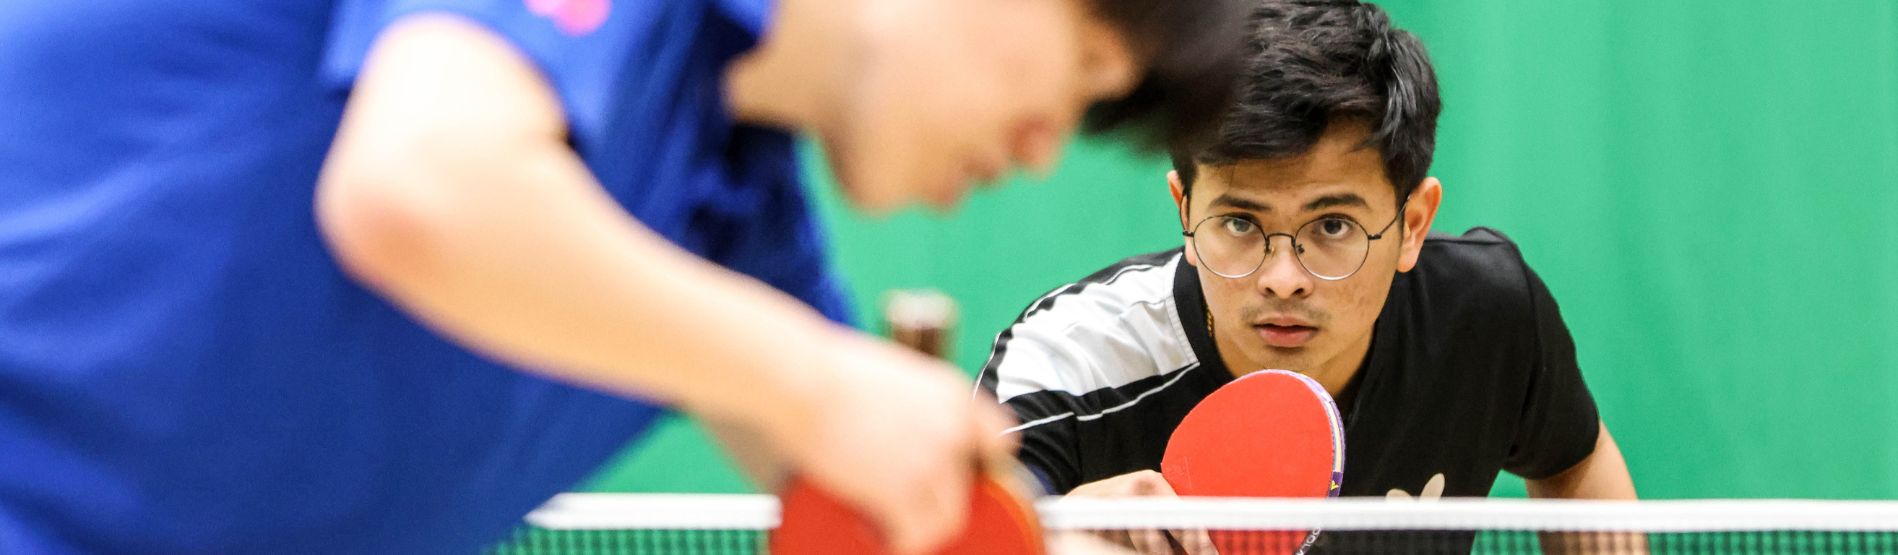 Swansea University table tennis club playing at Swansea Bay Sports Park